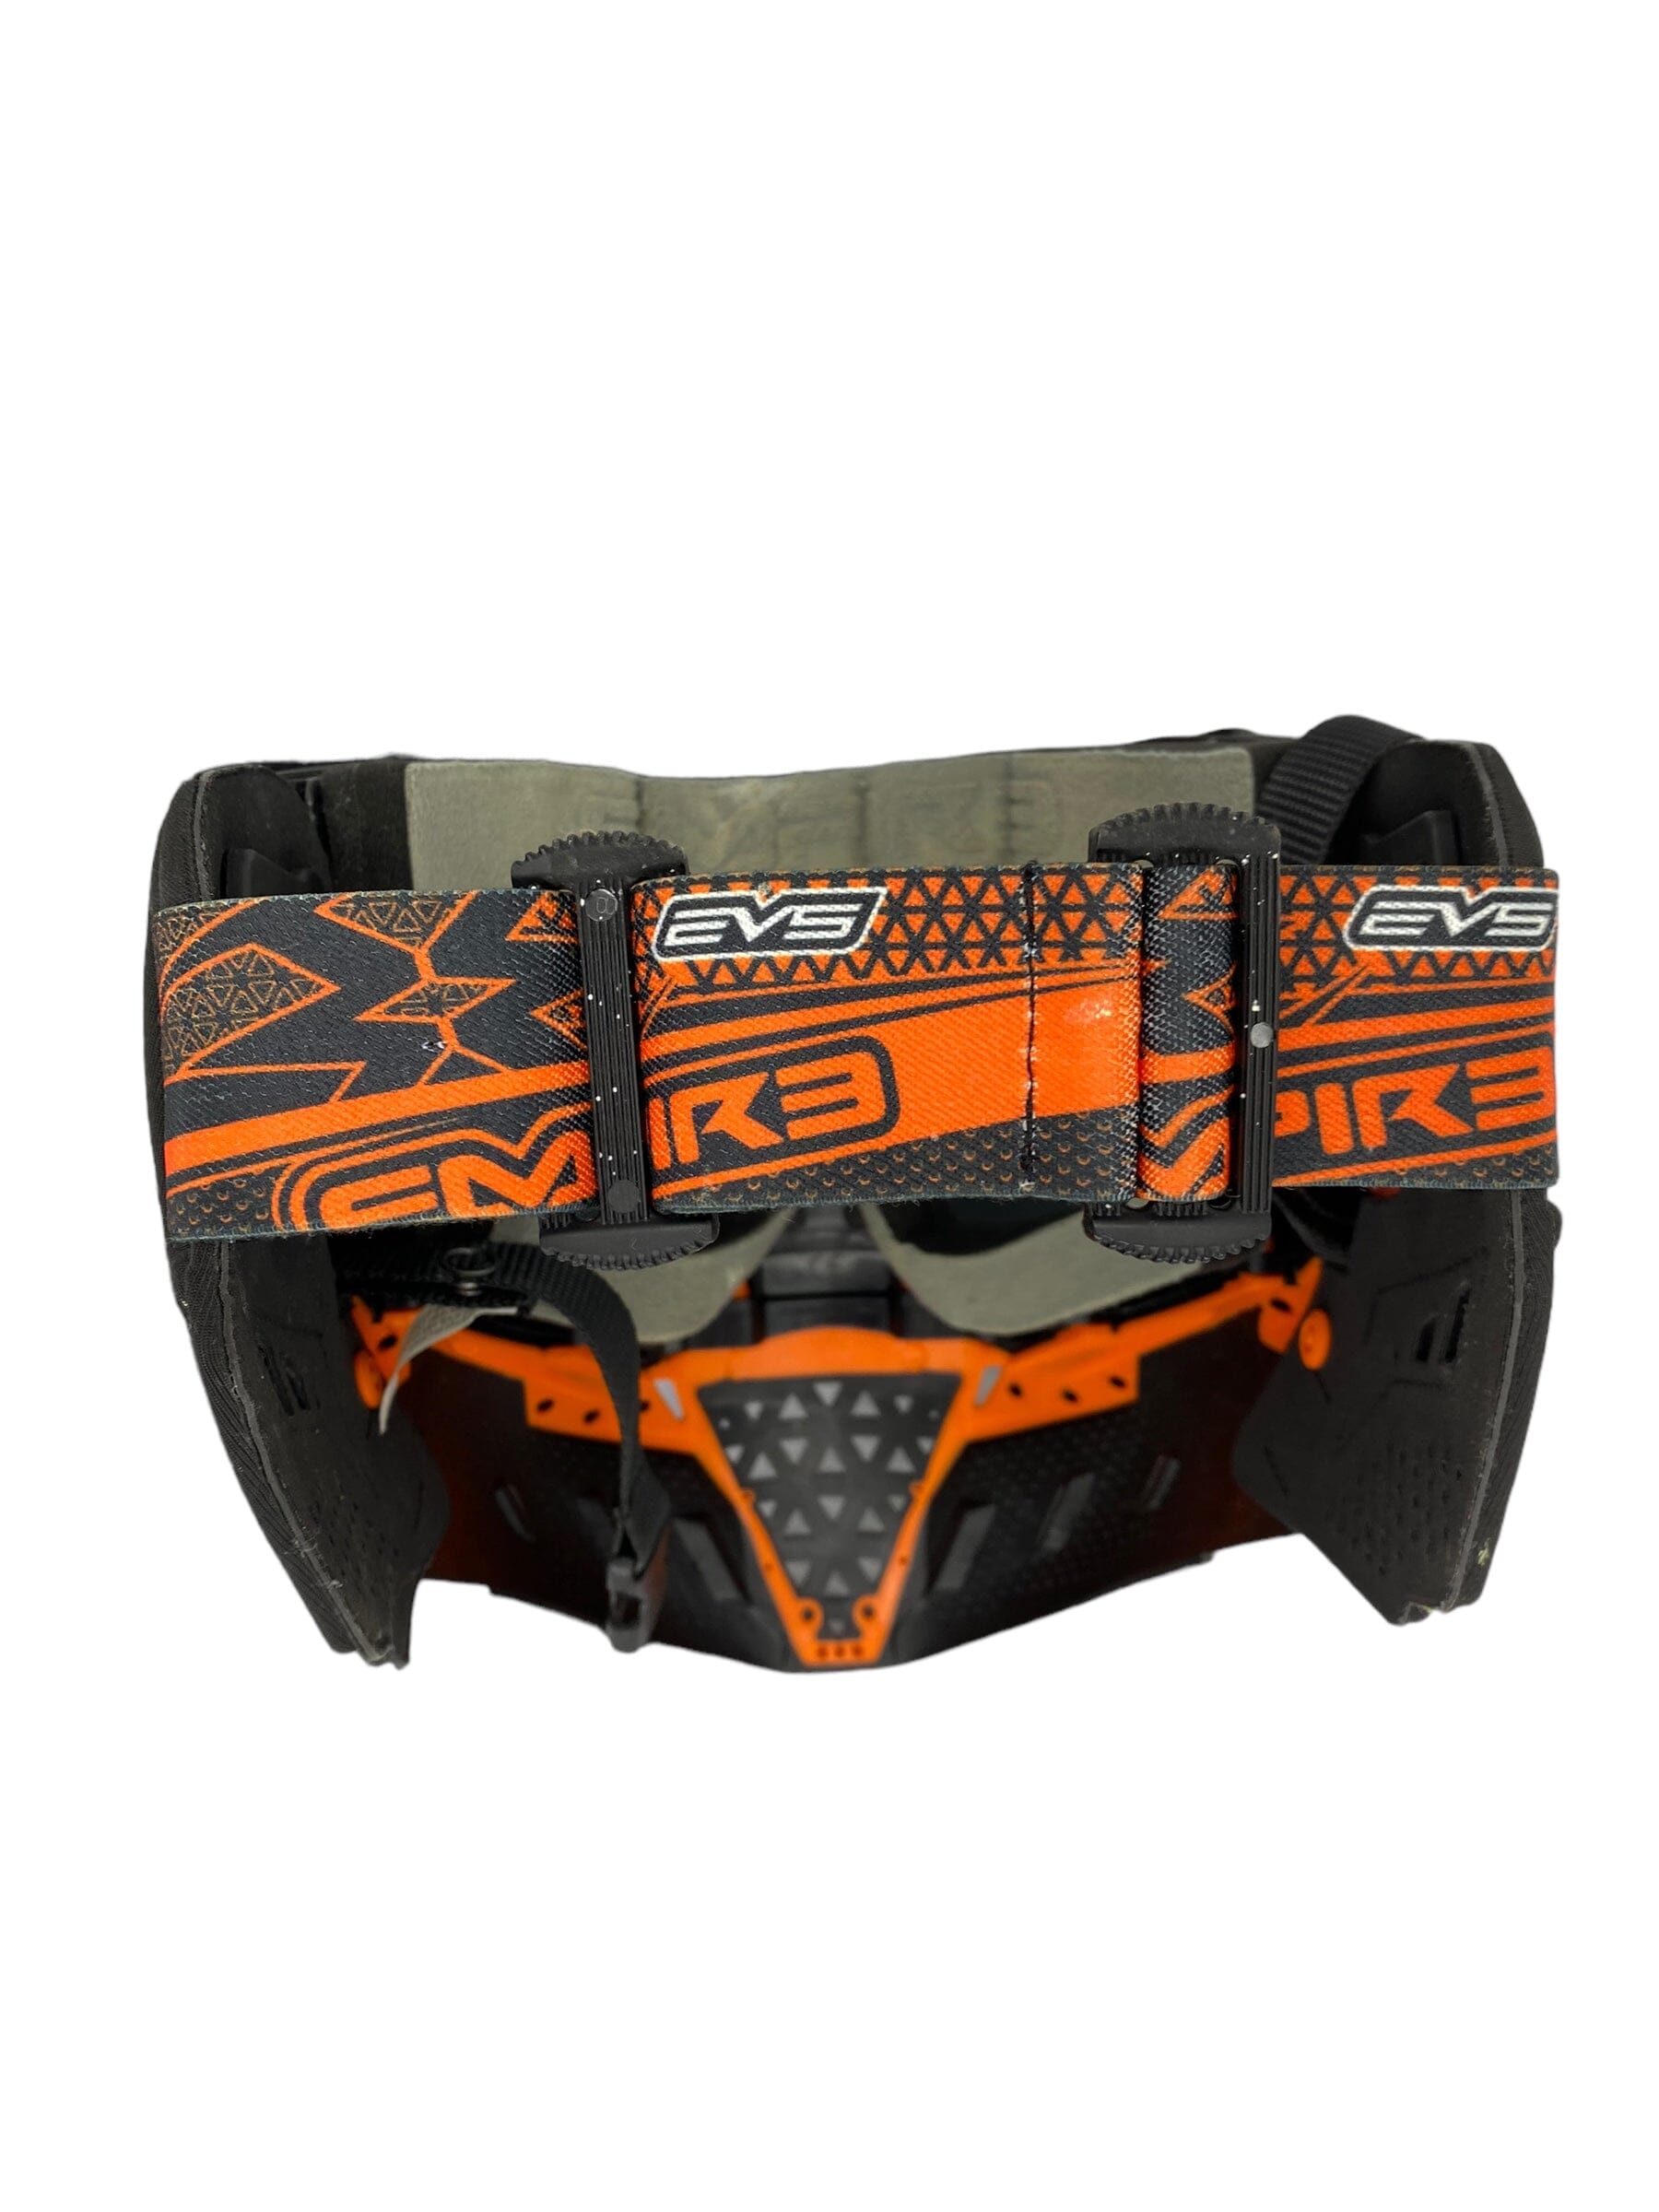 Used Empire EVS Mask Goggles Paintball Gun from CPXBrosPaintball Buy/Sell/Trade Paintball Markers, New Paintball Guns, Paintball Hoppers, Paintball Masks, and Hormesis Headbands